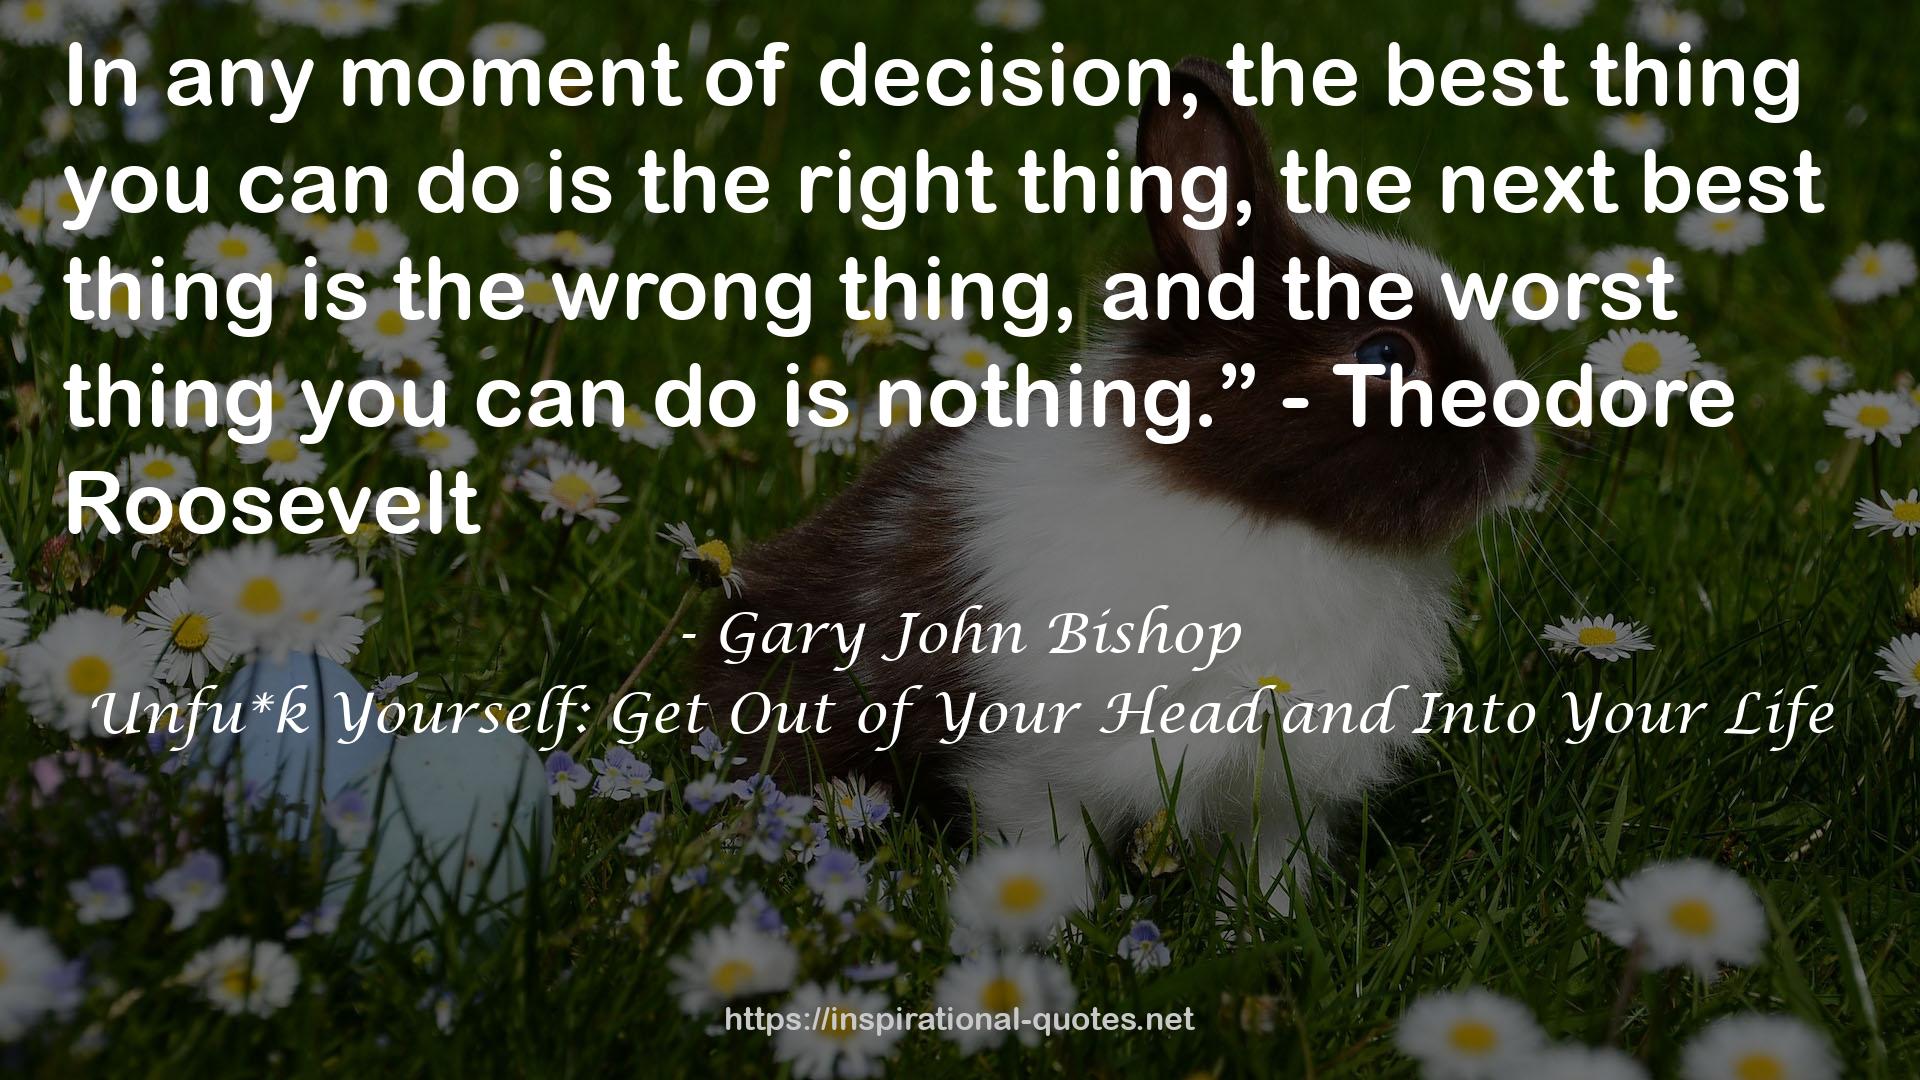 Unfu*k Yourself: Get Out of Your Head and Into Your Life QUOTES